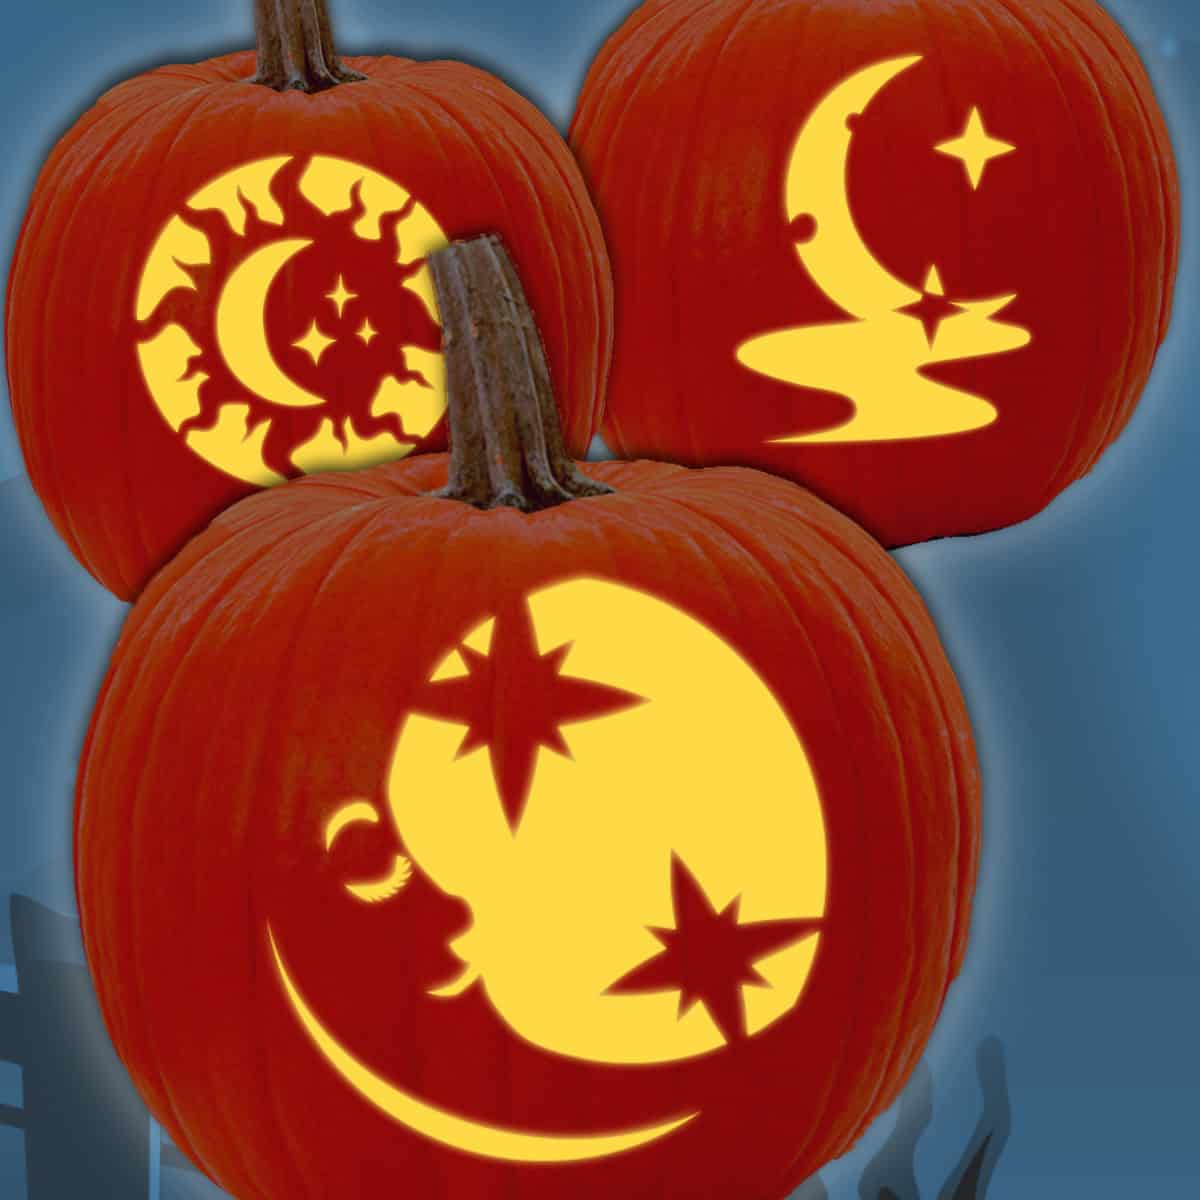 Three pumpkins glowing that were carved with moon and starts pumpkin carving patterns.